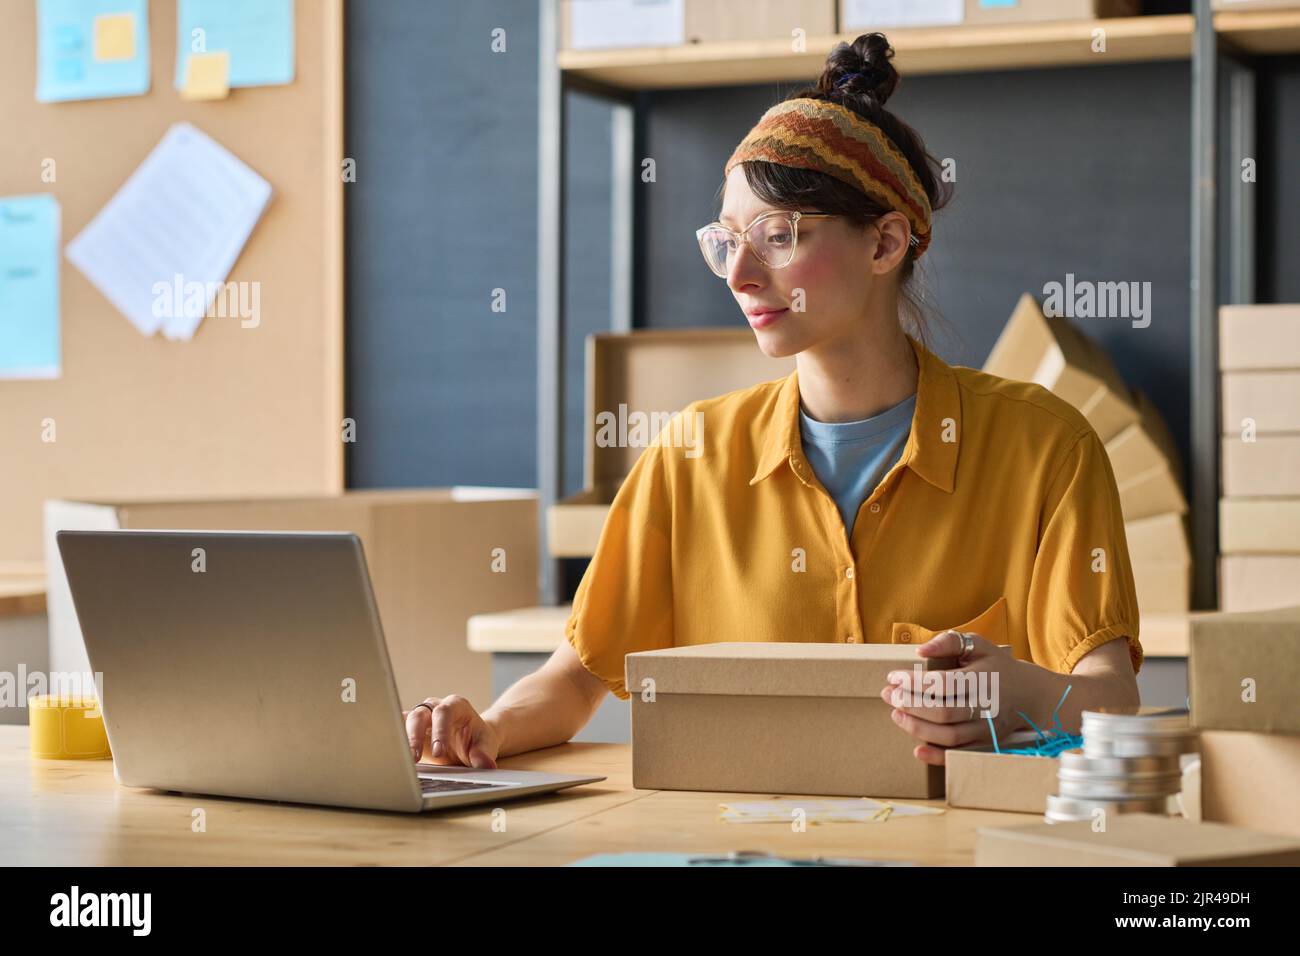 Warehouse woman sitting at table with laptop and cardboard box, and working with online orders to make parcels Stock Photo